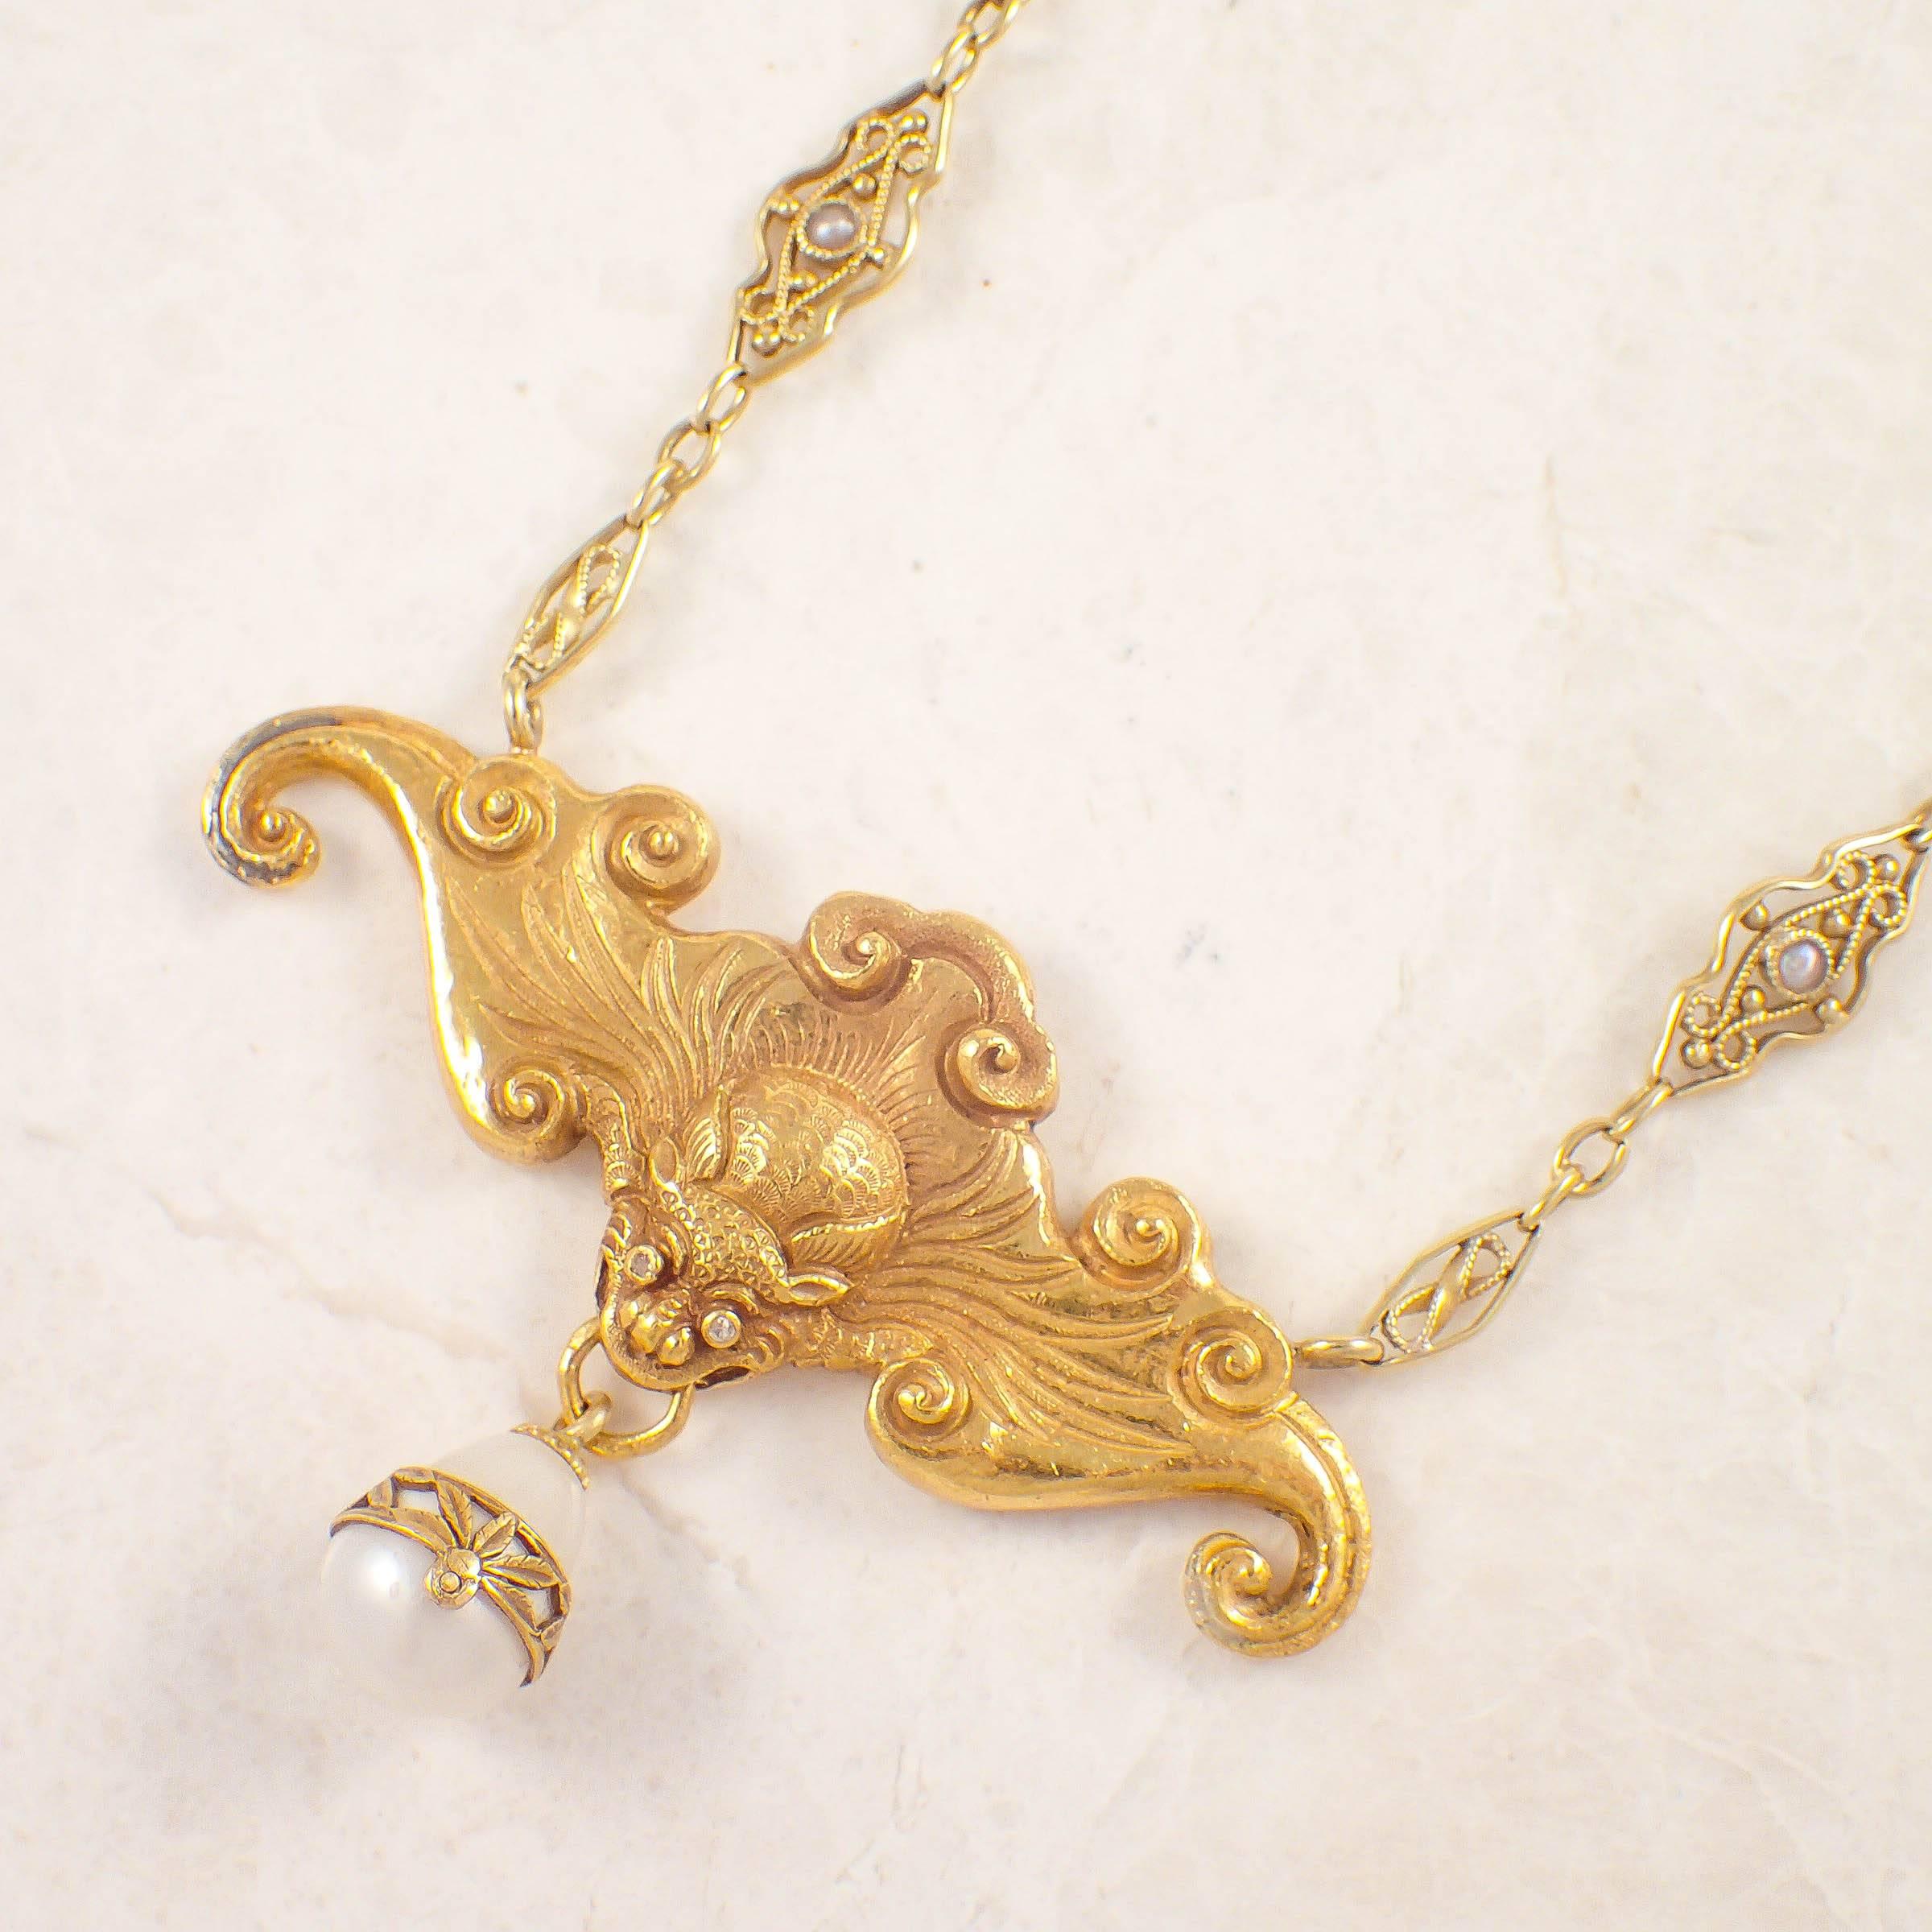 Art Nouveau 18k yellow gold bat necklace. The fancy link chain is set with small seed pearls. Suspended from the chain is a flying bat center piece with a pearl dangling from its mouth. Circa 1900s.